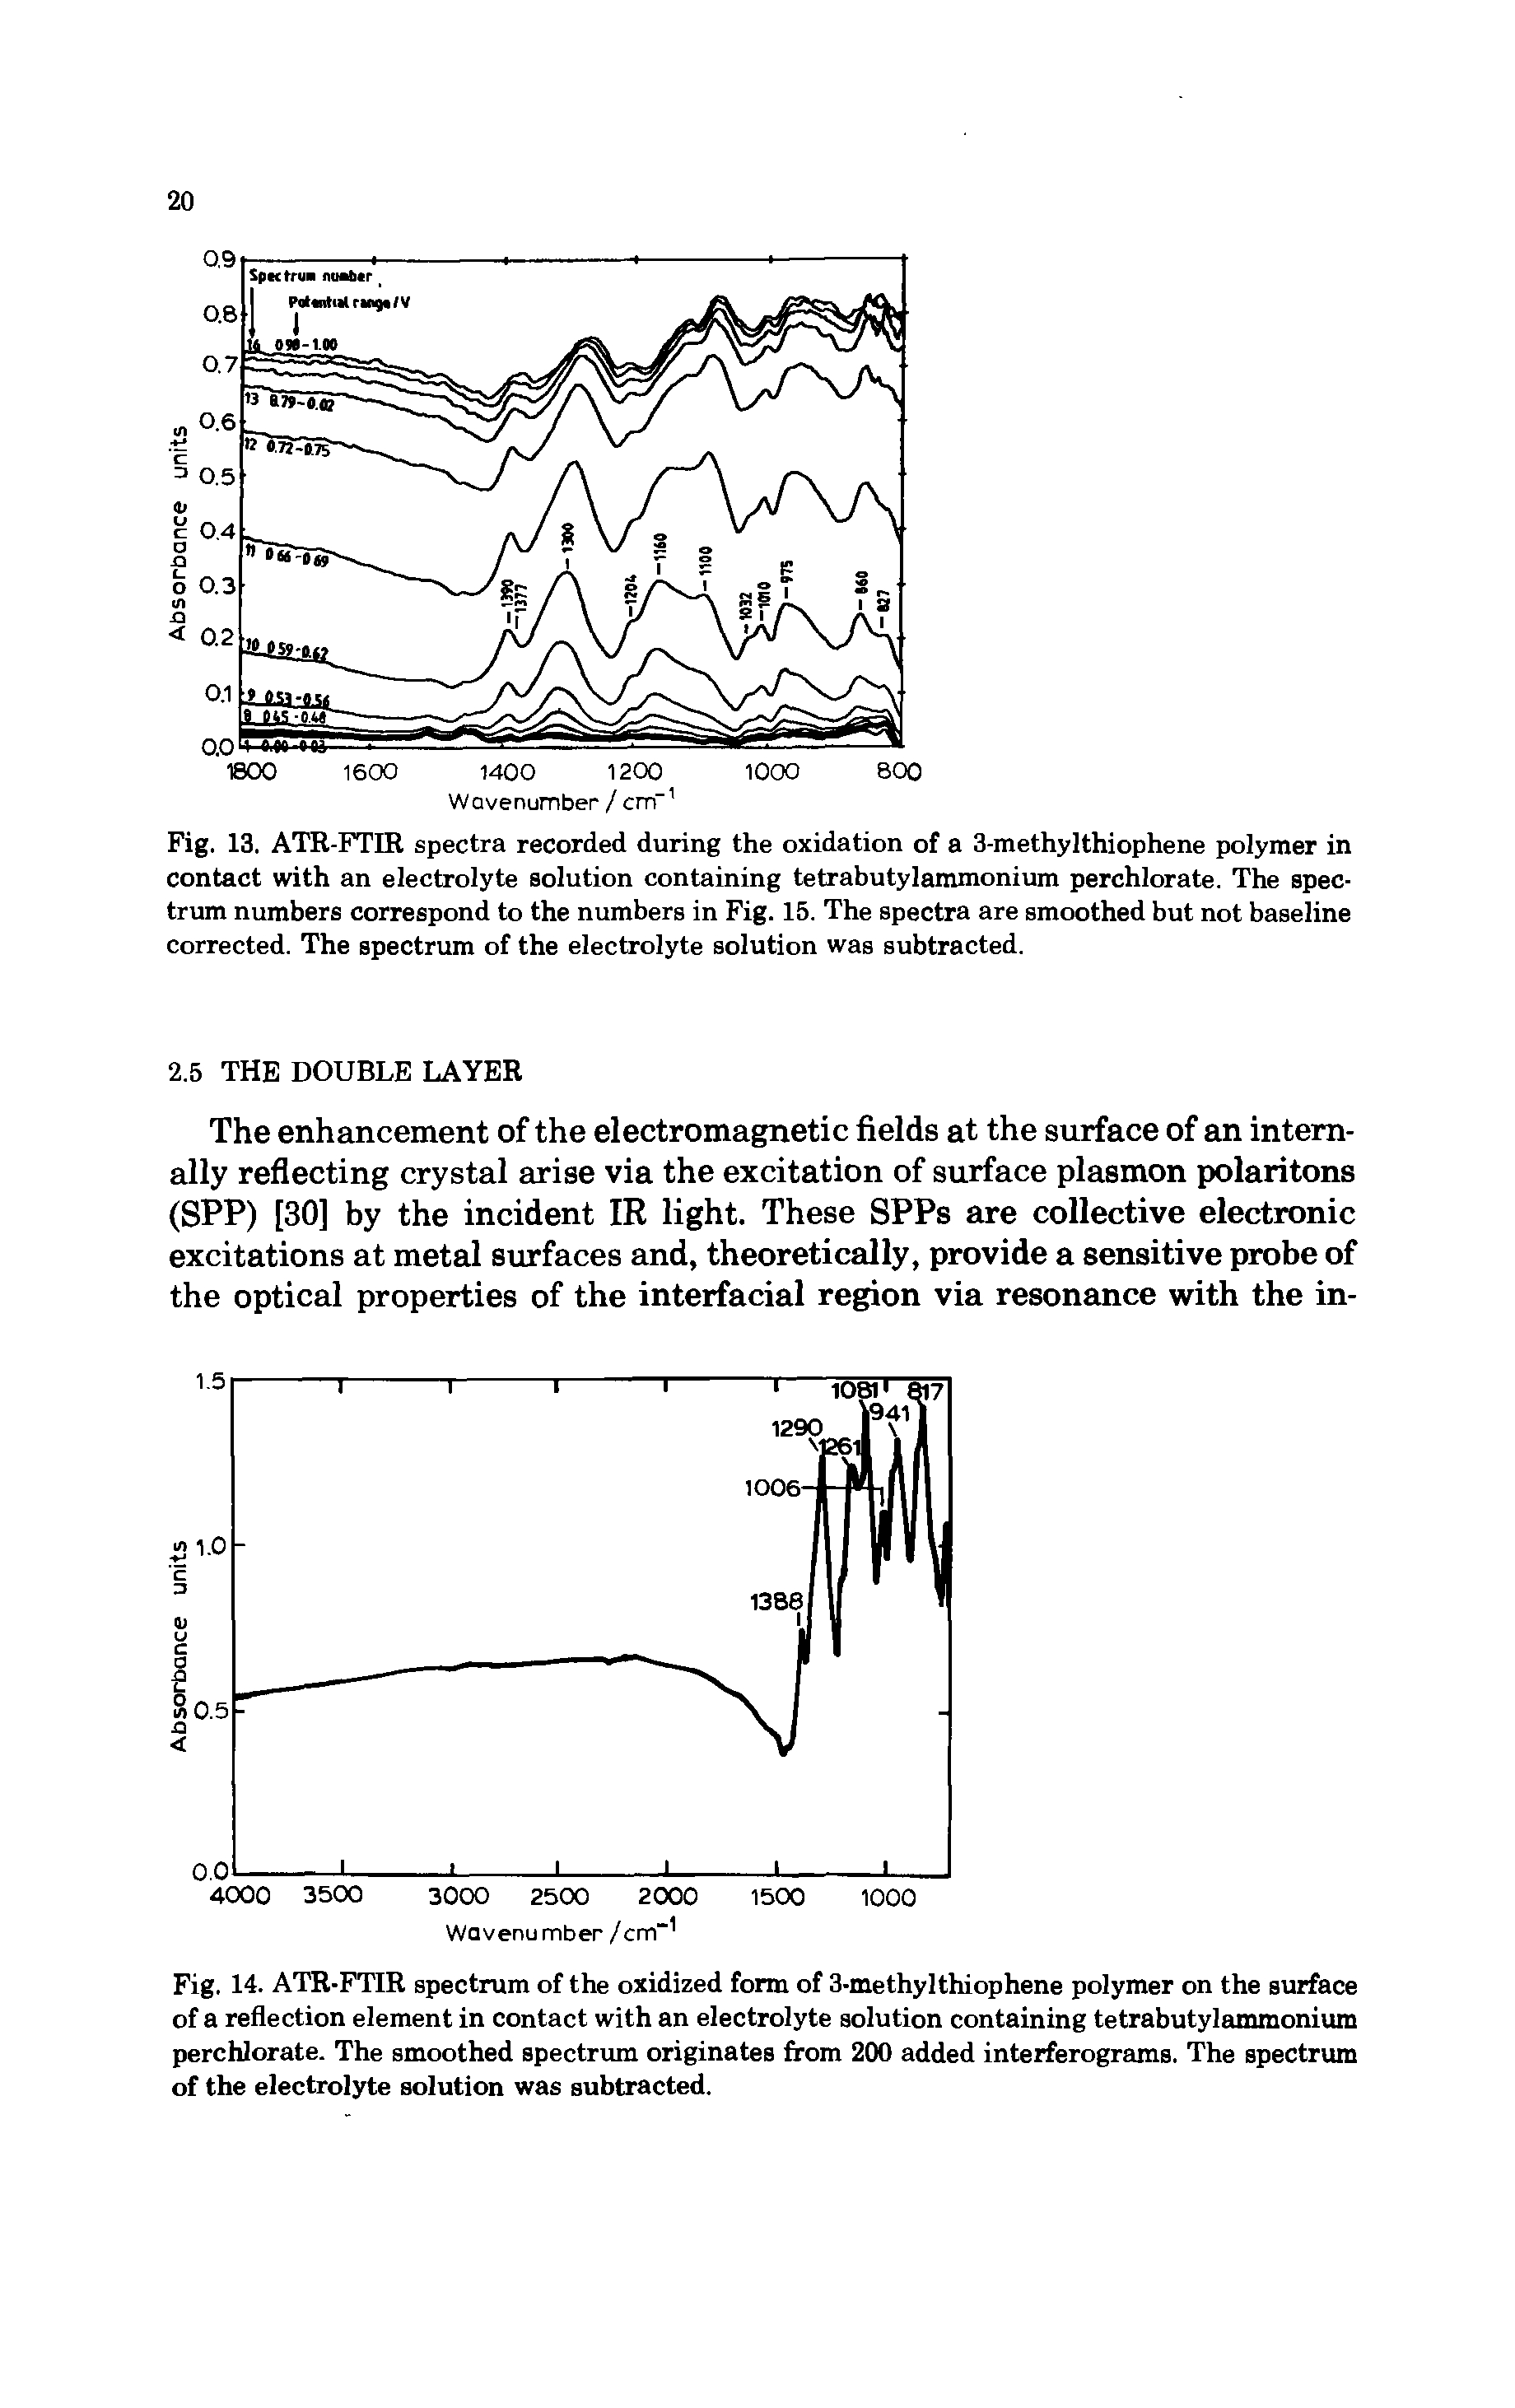 Fig. 14. ATR-FTIR spectrum of the oxidized form of 3-methylthiophene polymer on the surface of a reflection element in contact with an electrolyte solution containing tetrabutylammonium perchlorate. The smoothed spectrum originates from 200 added interferograms. The spectrum of the electrolyte solution was subtracted.